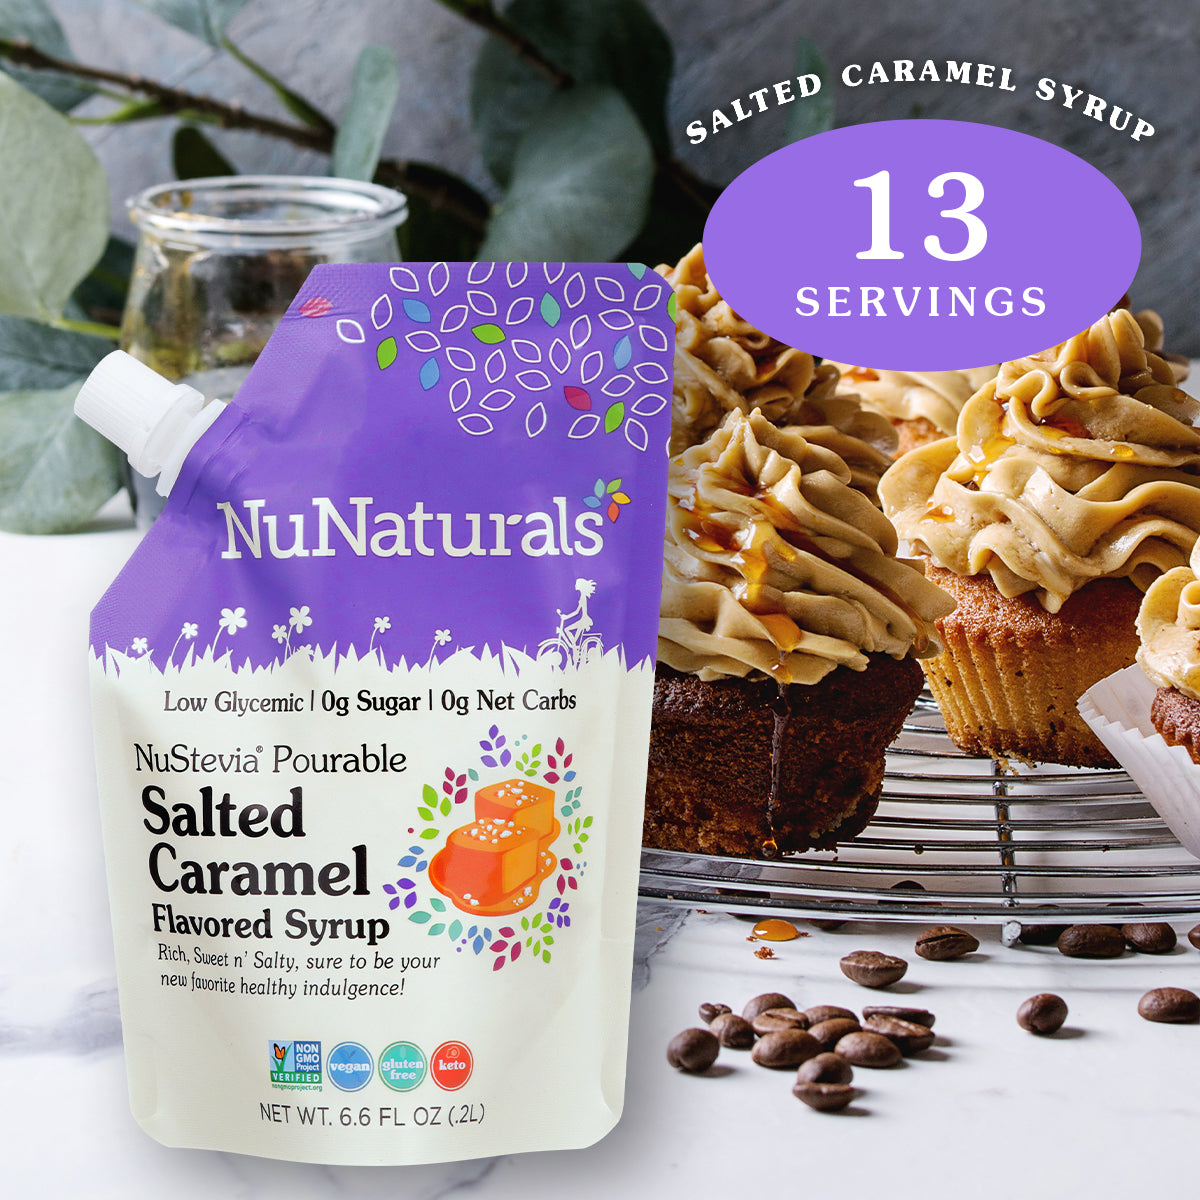 6.6 oz. NuNaturals Salted Caramel Flavored Stevia Syrup with frosted cupcakes and a syrup drizzle